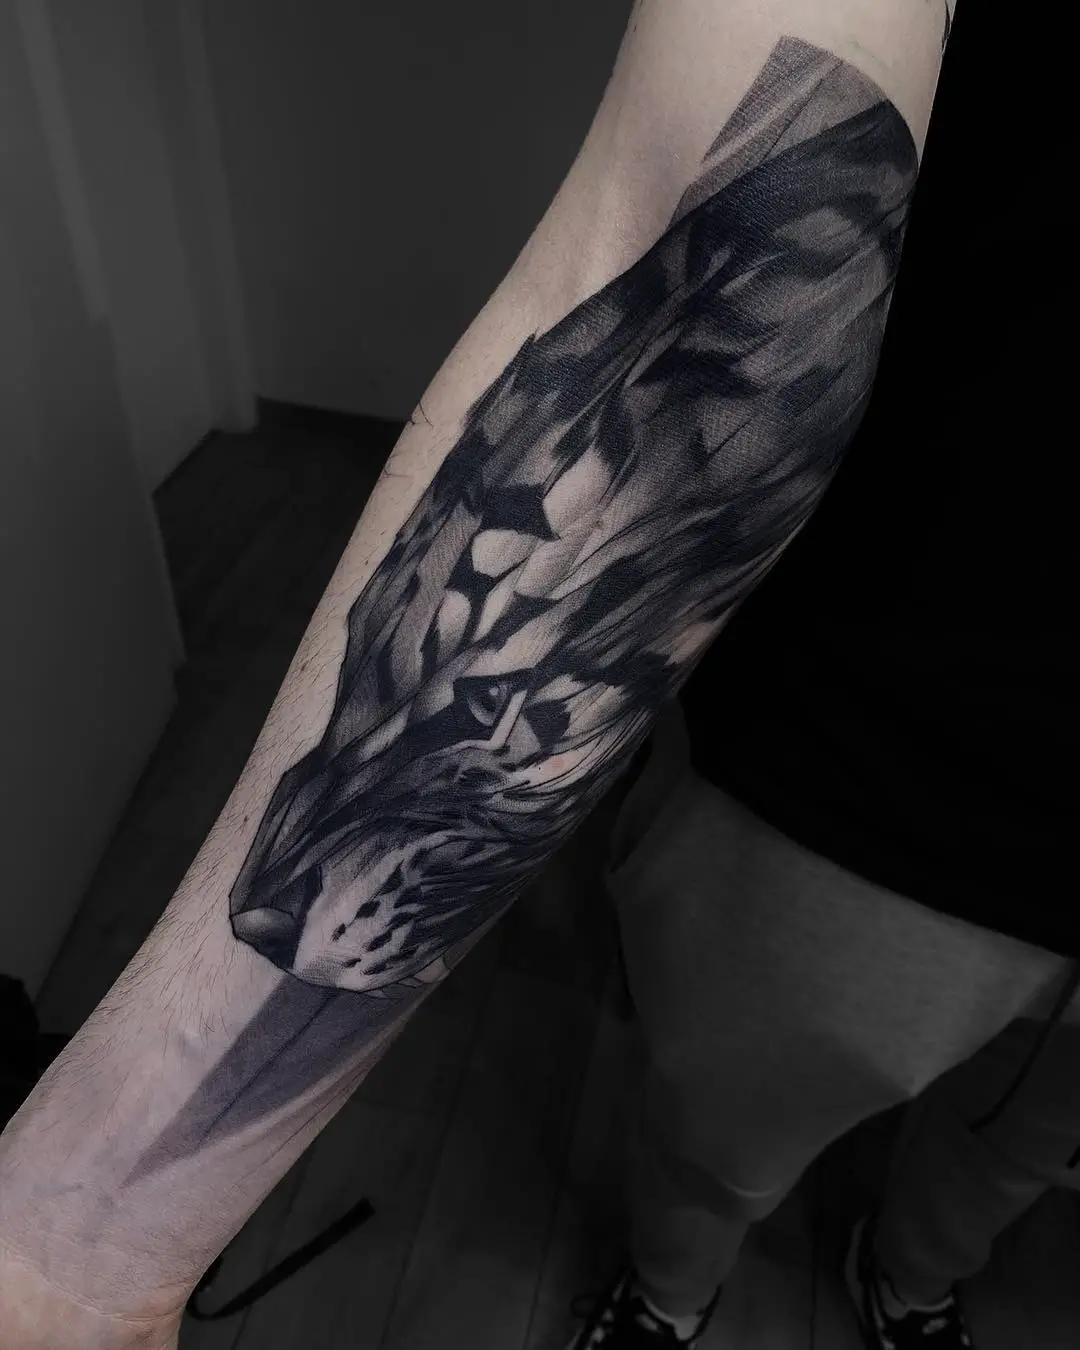 Amazing abstract tattoo on lower arm by enricoway